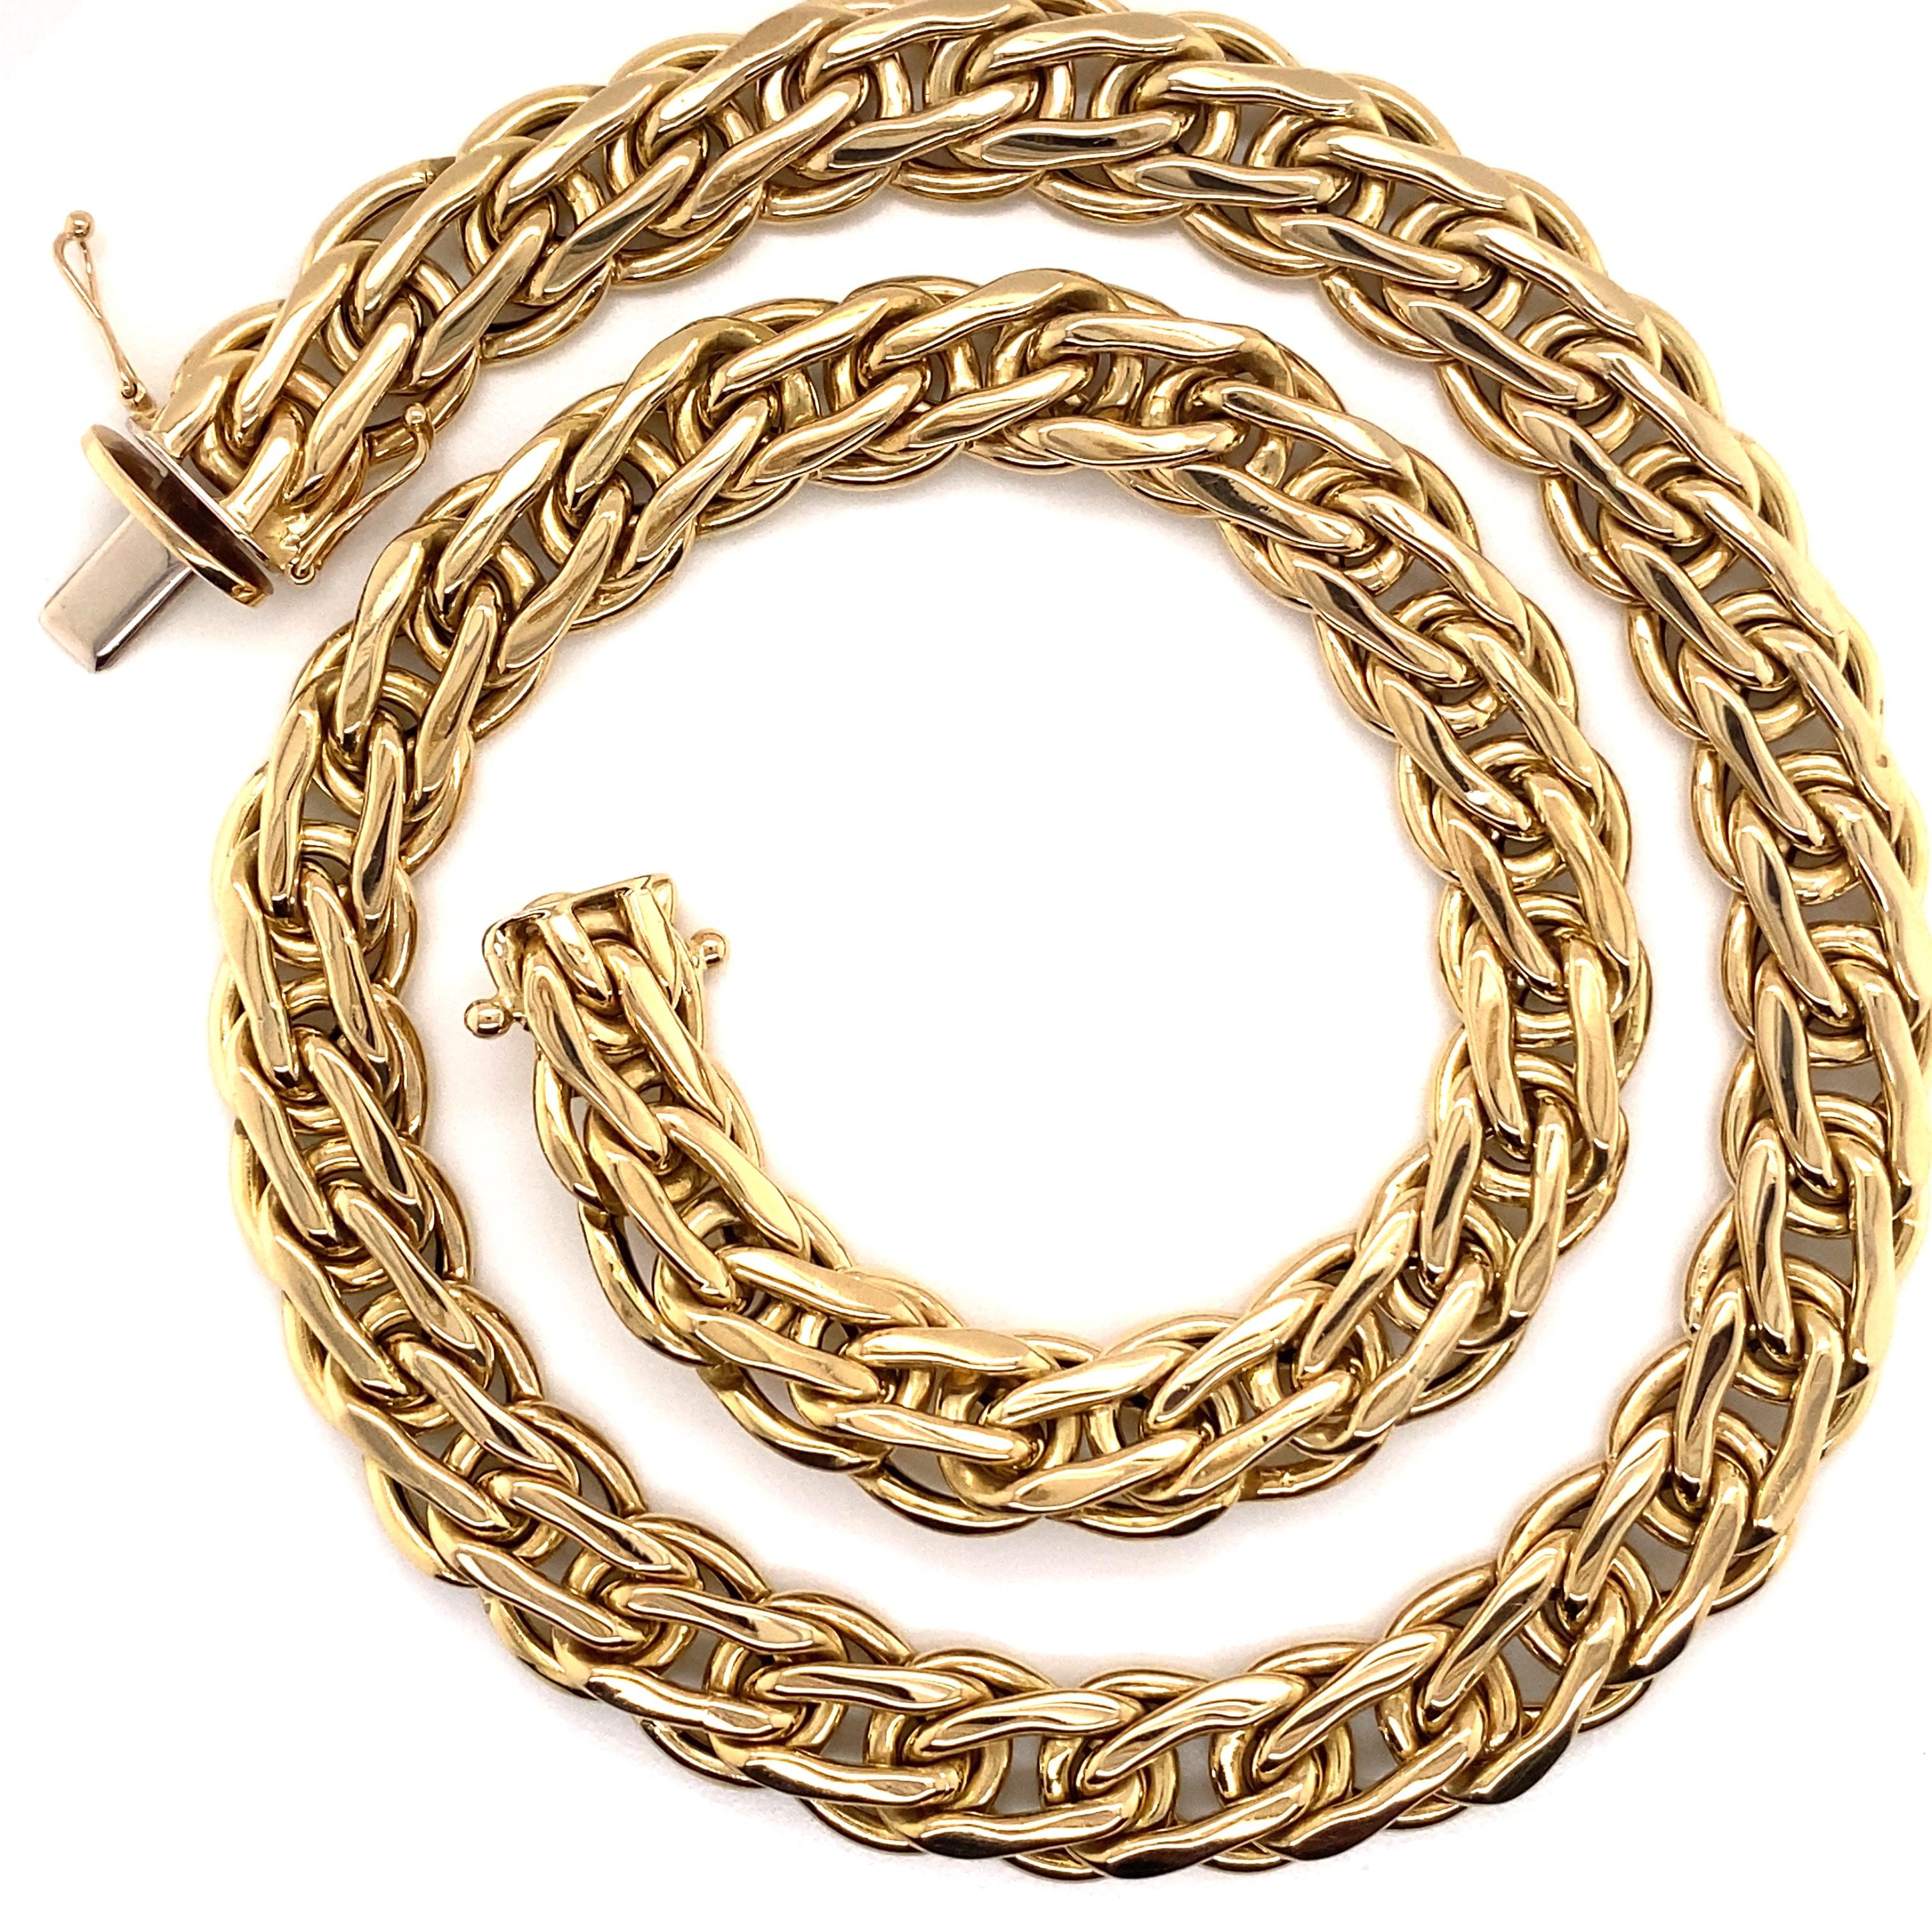 Vintage 1990's 14K Yellow Gold Italian Wide Link Necklace - The Italian made link necklace is 11mm wide and 16.75 inches long. It features a hidden clasp with 2 safety locks. The necklace weighs 38 grams.